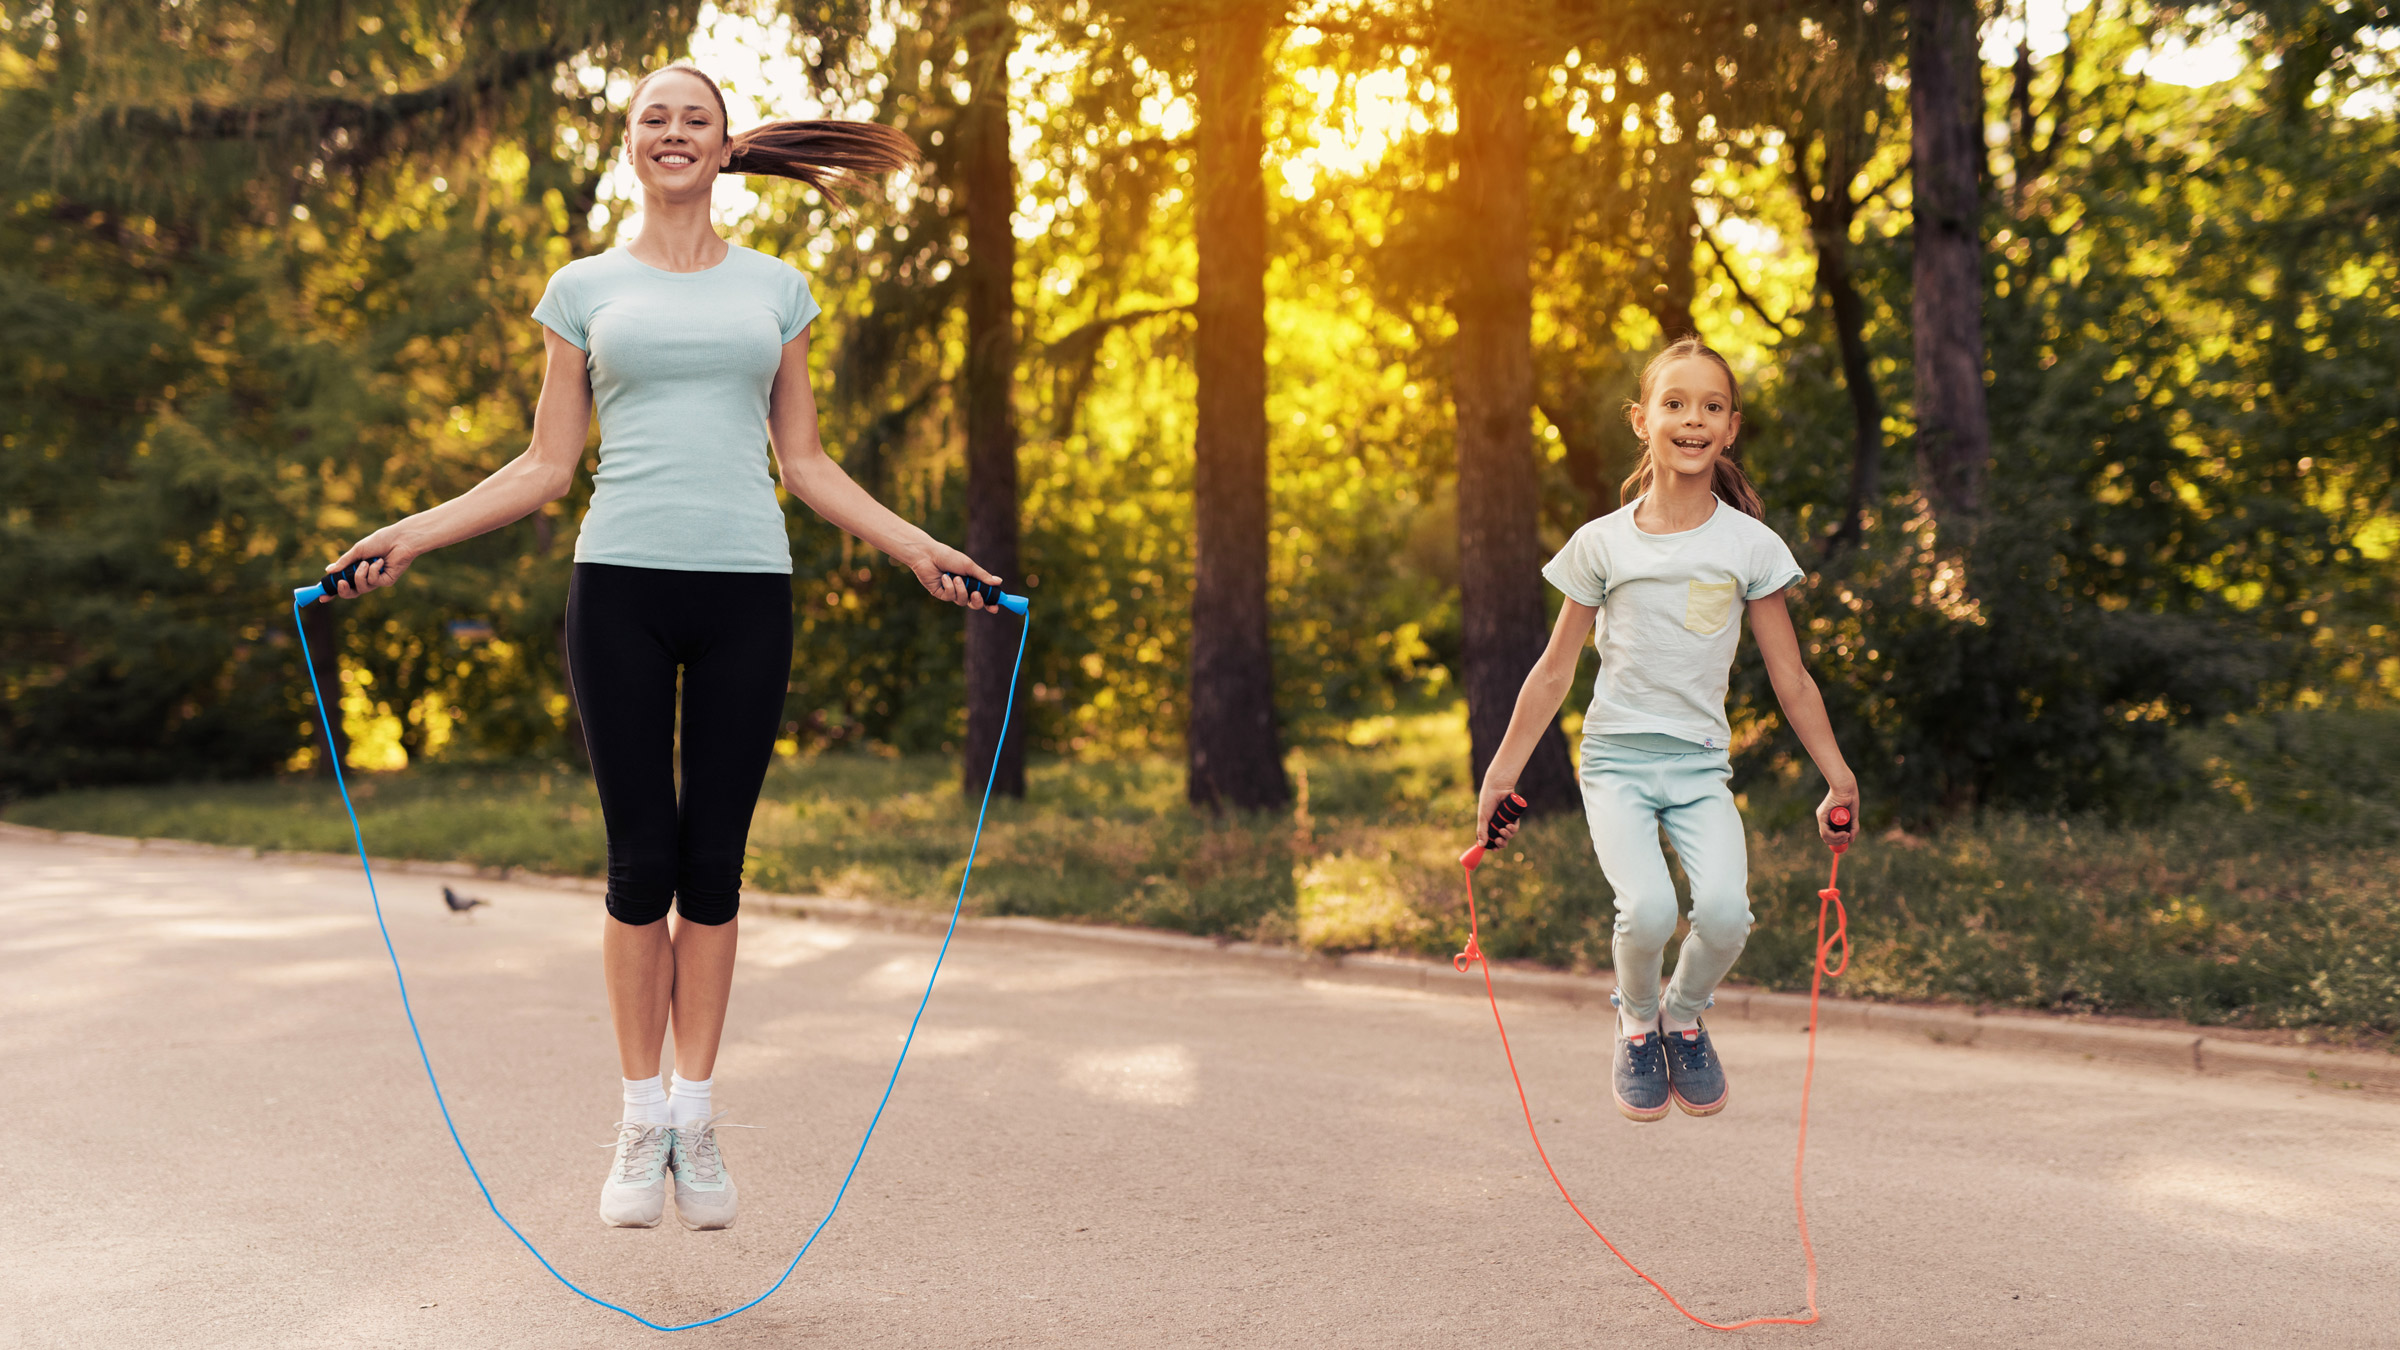 7 Health Benefits of Jumping Rope